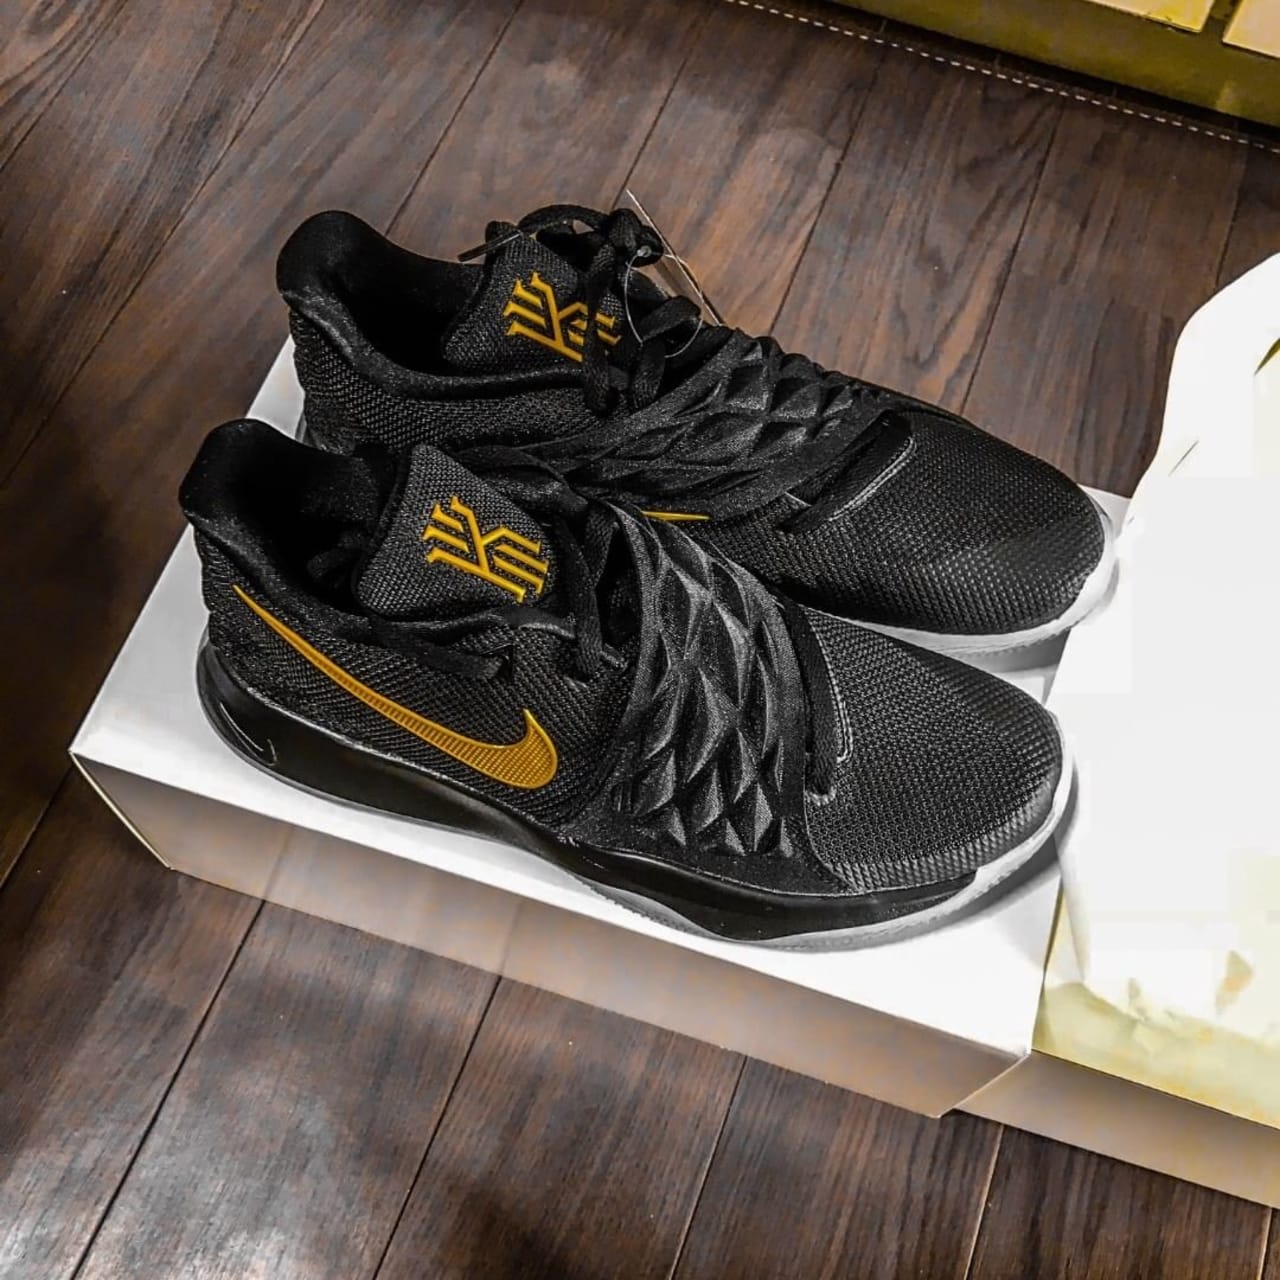 NIKEiD Kyrie Low Designs | Sole Collector